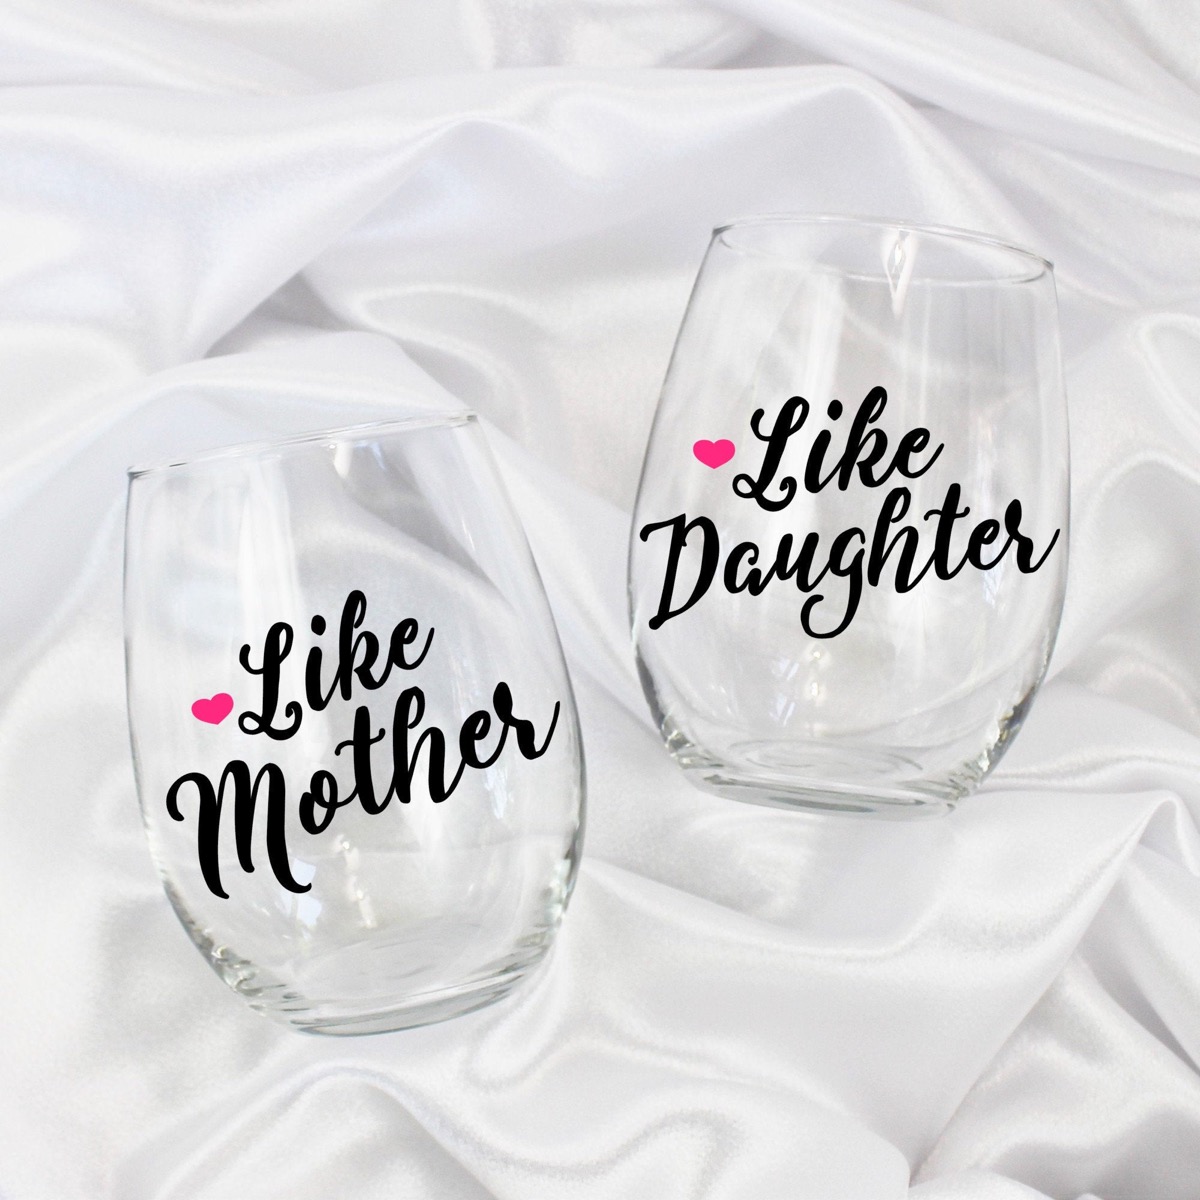 matching stemless wine glasses with "like mother" and "like daughter" on them, mother daughter gifts